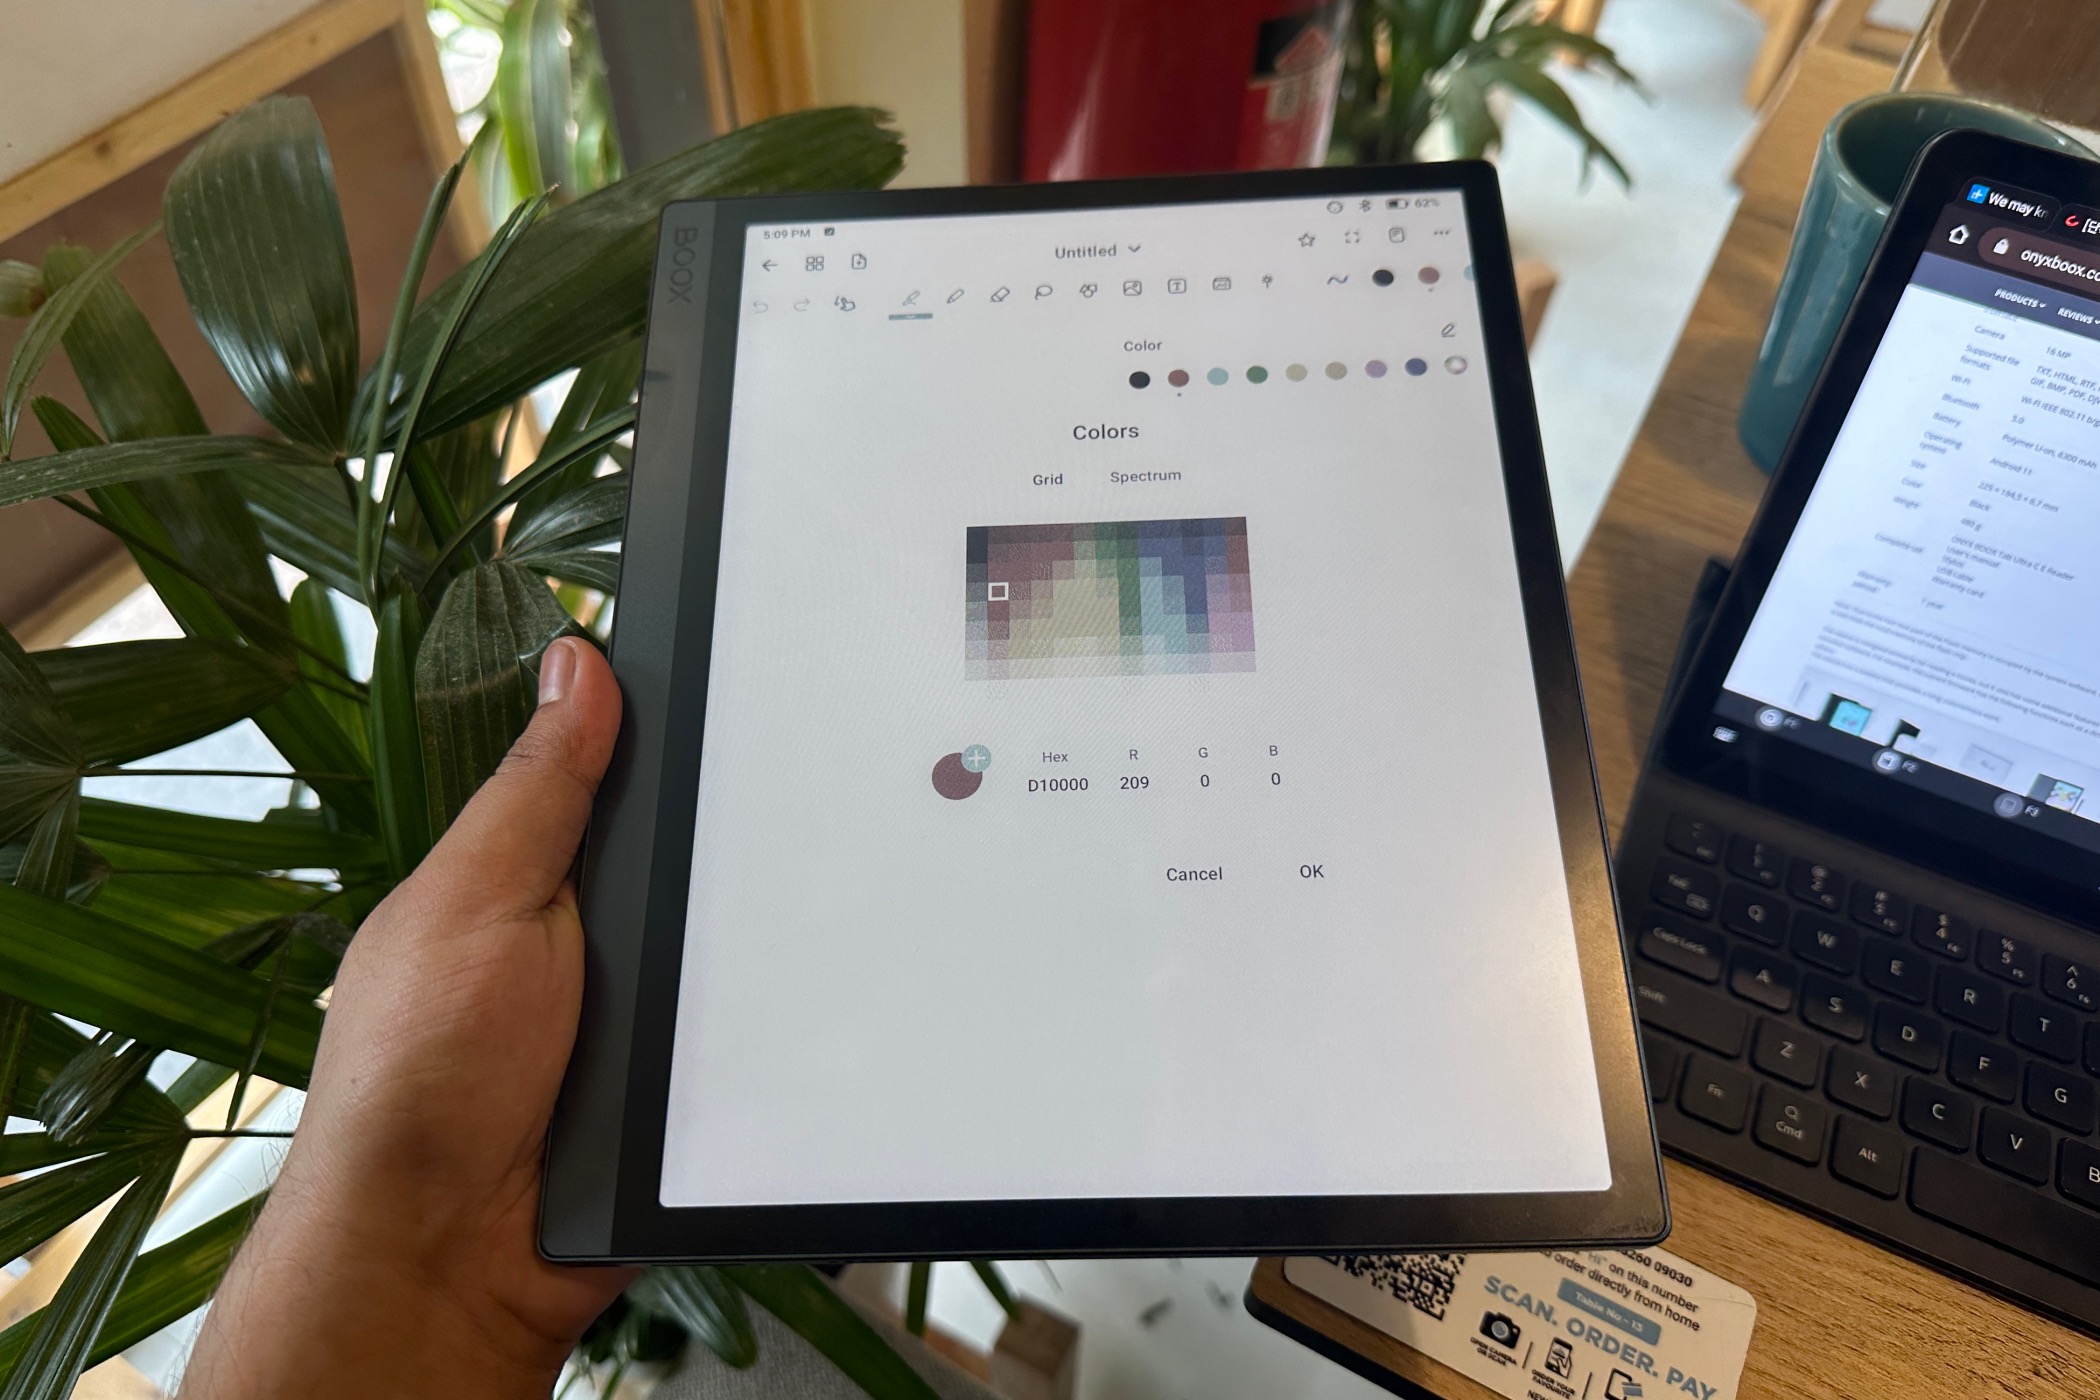 Low-Power Productivity Tablets : Boox Tab Ultra C